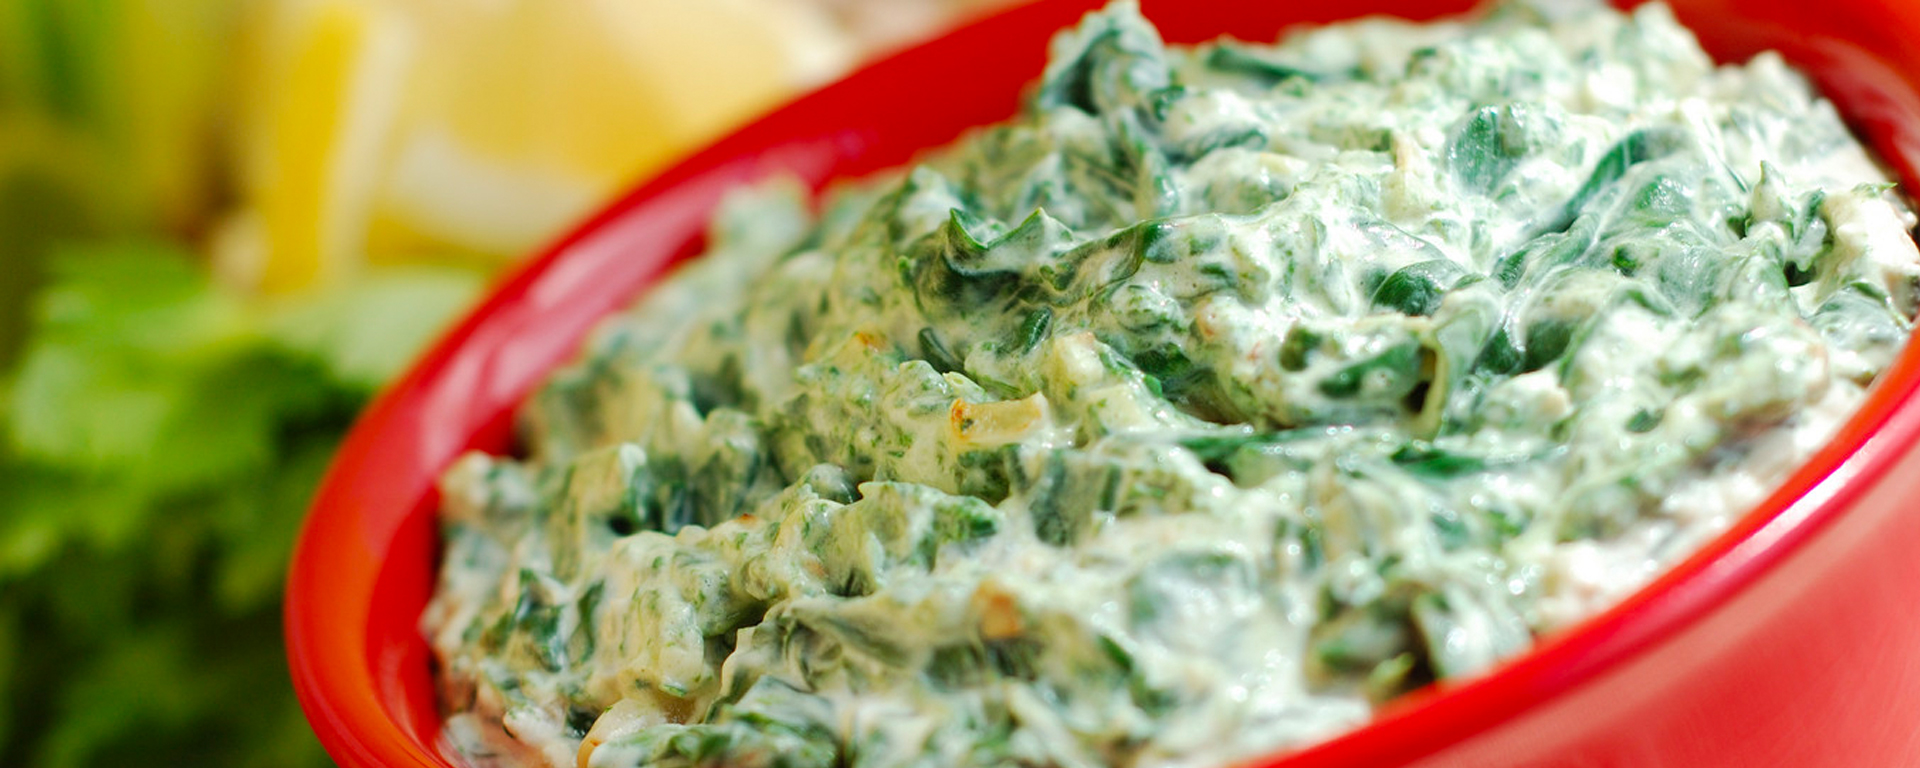 Photo of - Hot Spinach Dip